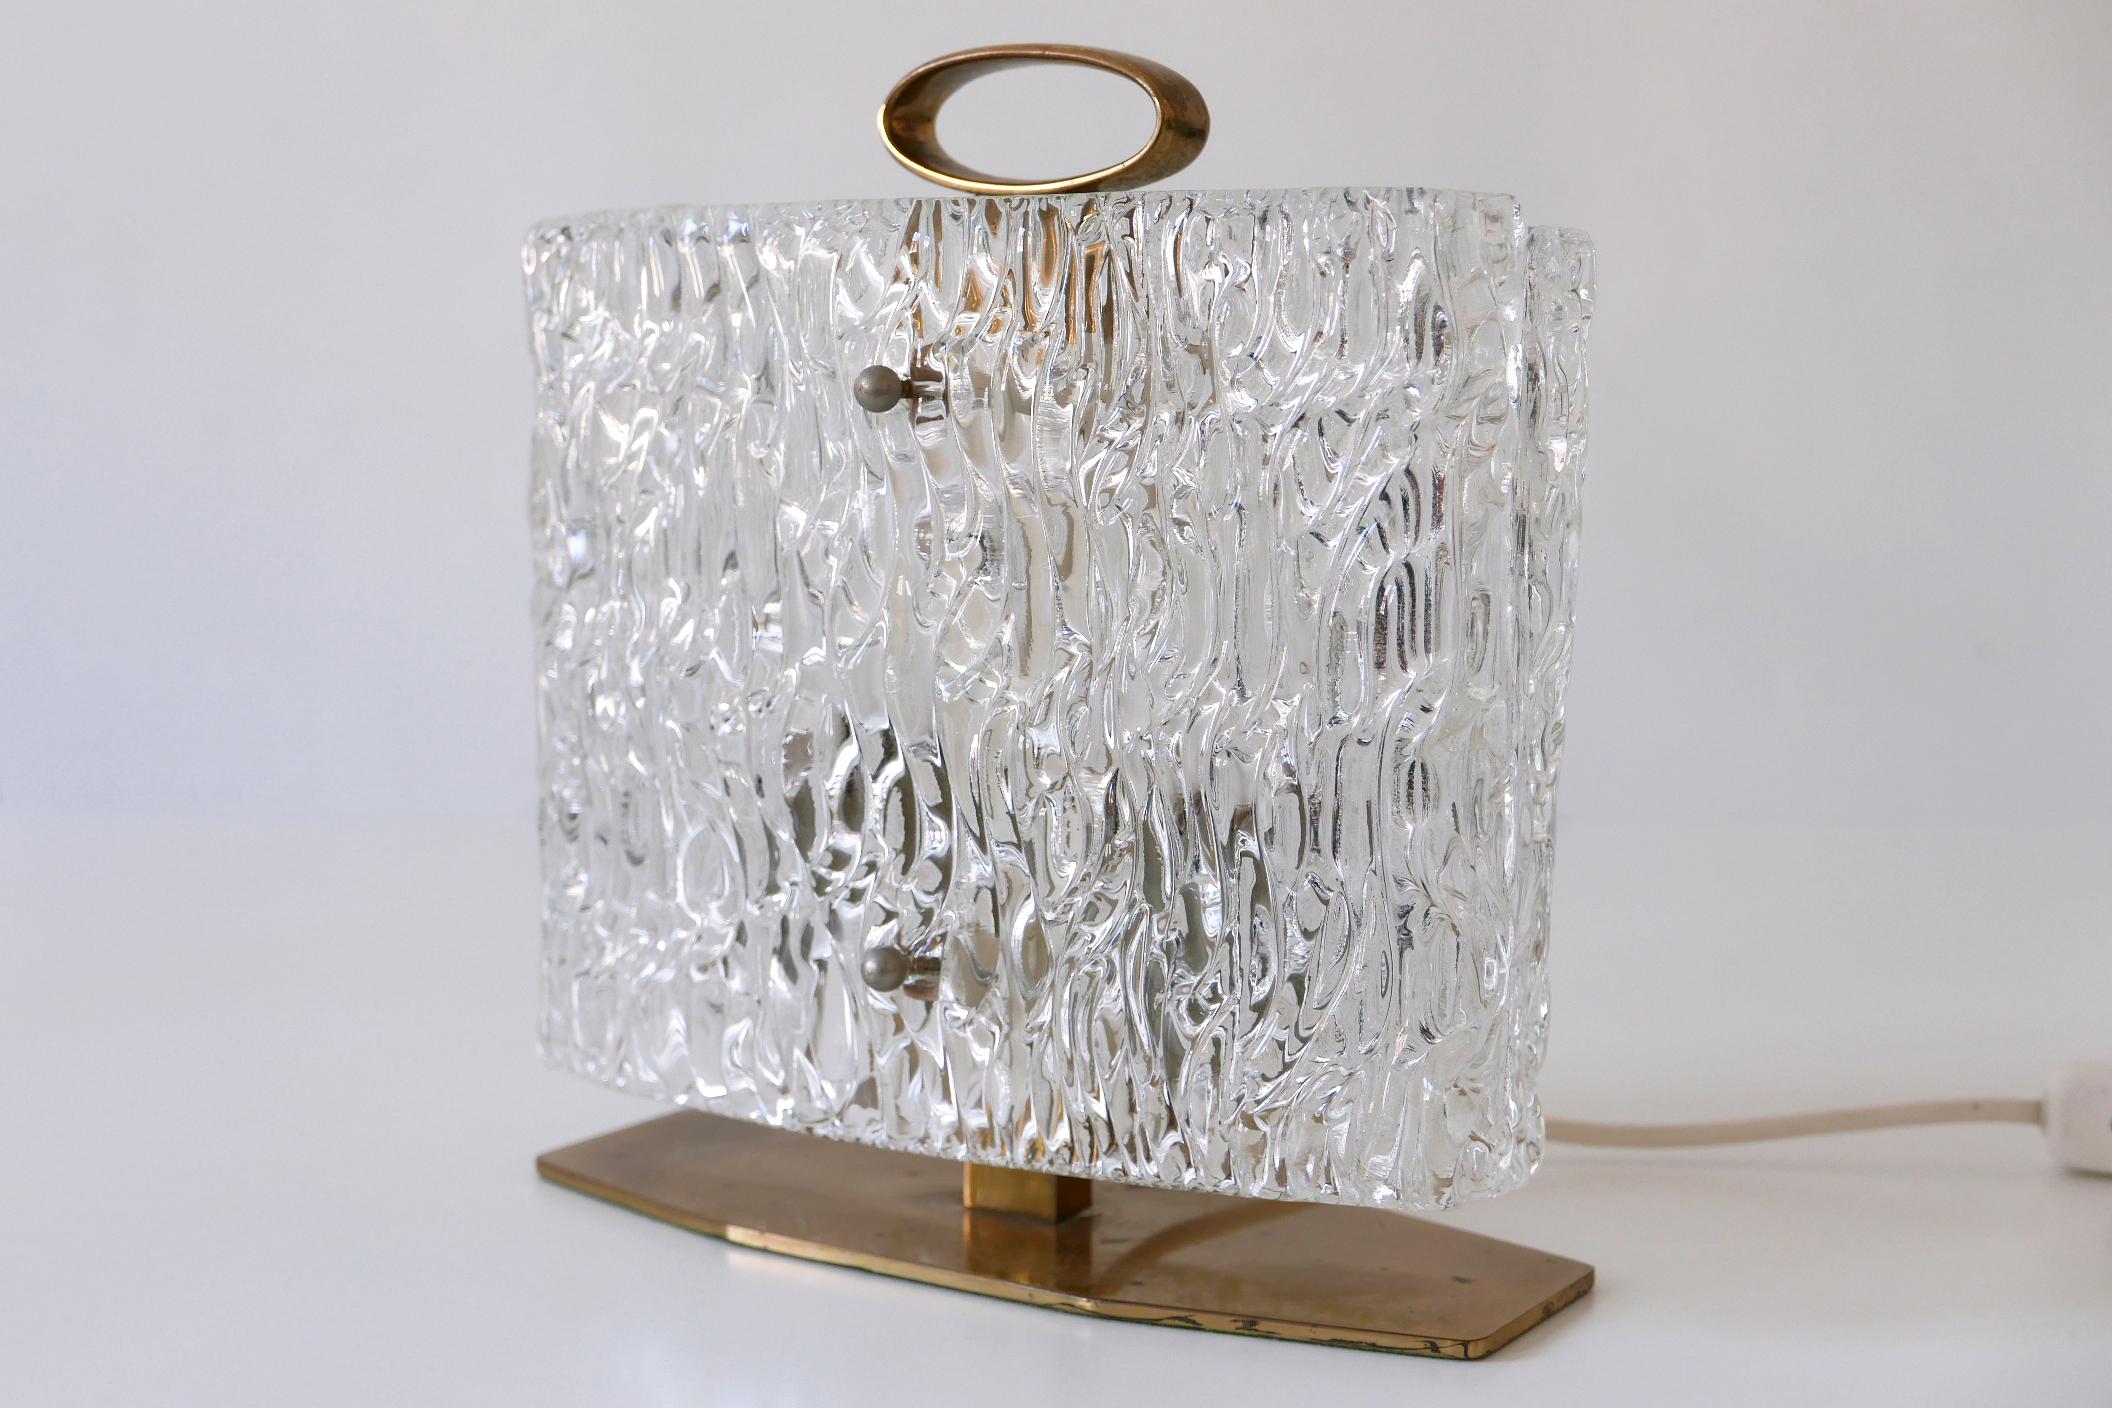 Brass Exceptional Mid-Century Modern Table Lamp with Ice Glass Shade, 1950s, Italy For Sale